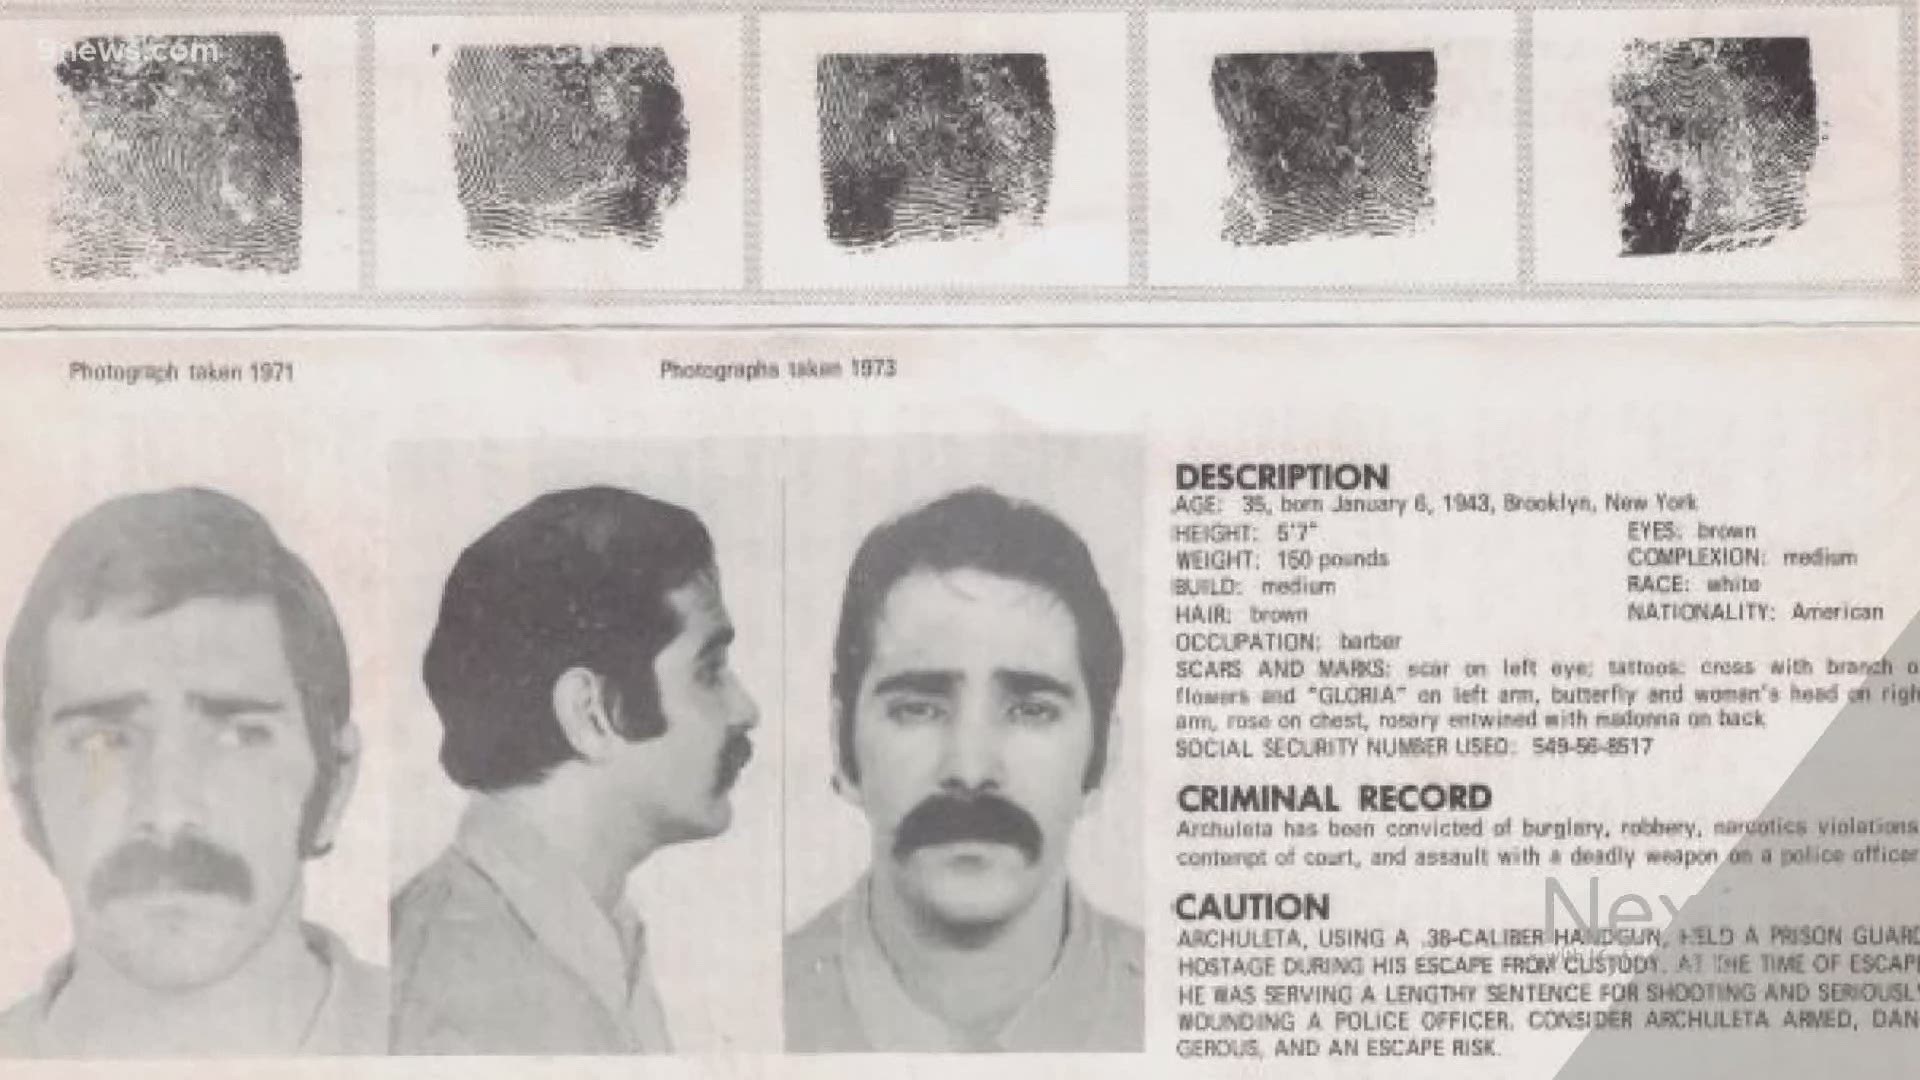 Lawrence Pusateri shot Denver Officer Daril Cinquanta in 1971. He escaped from a Colorado prison and has been living in New Mexico. Cinquanta never stopped looking.